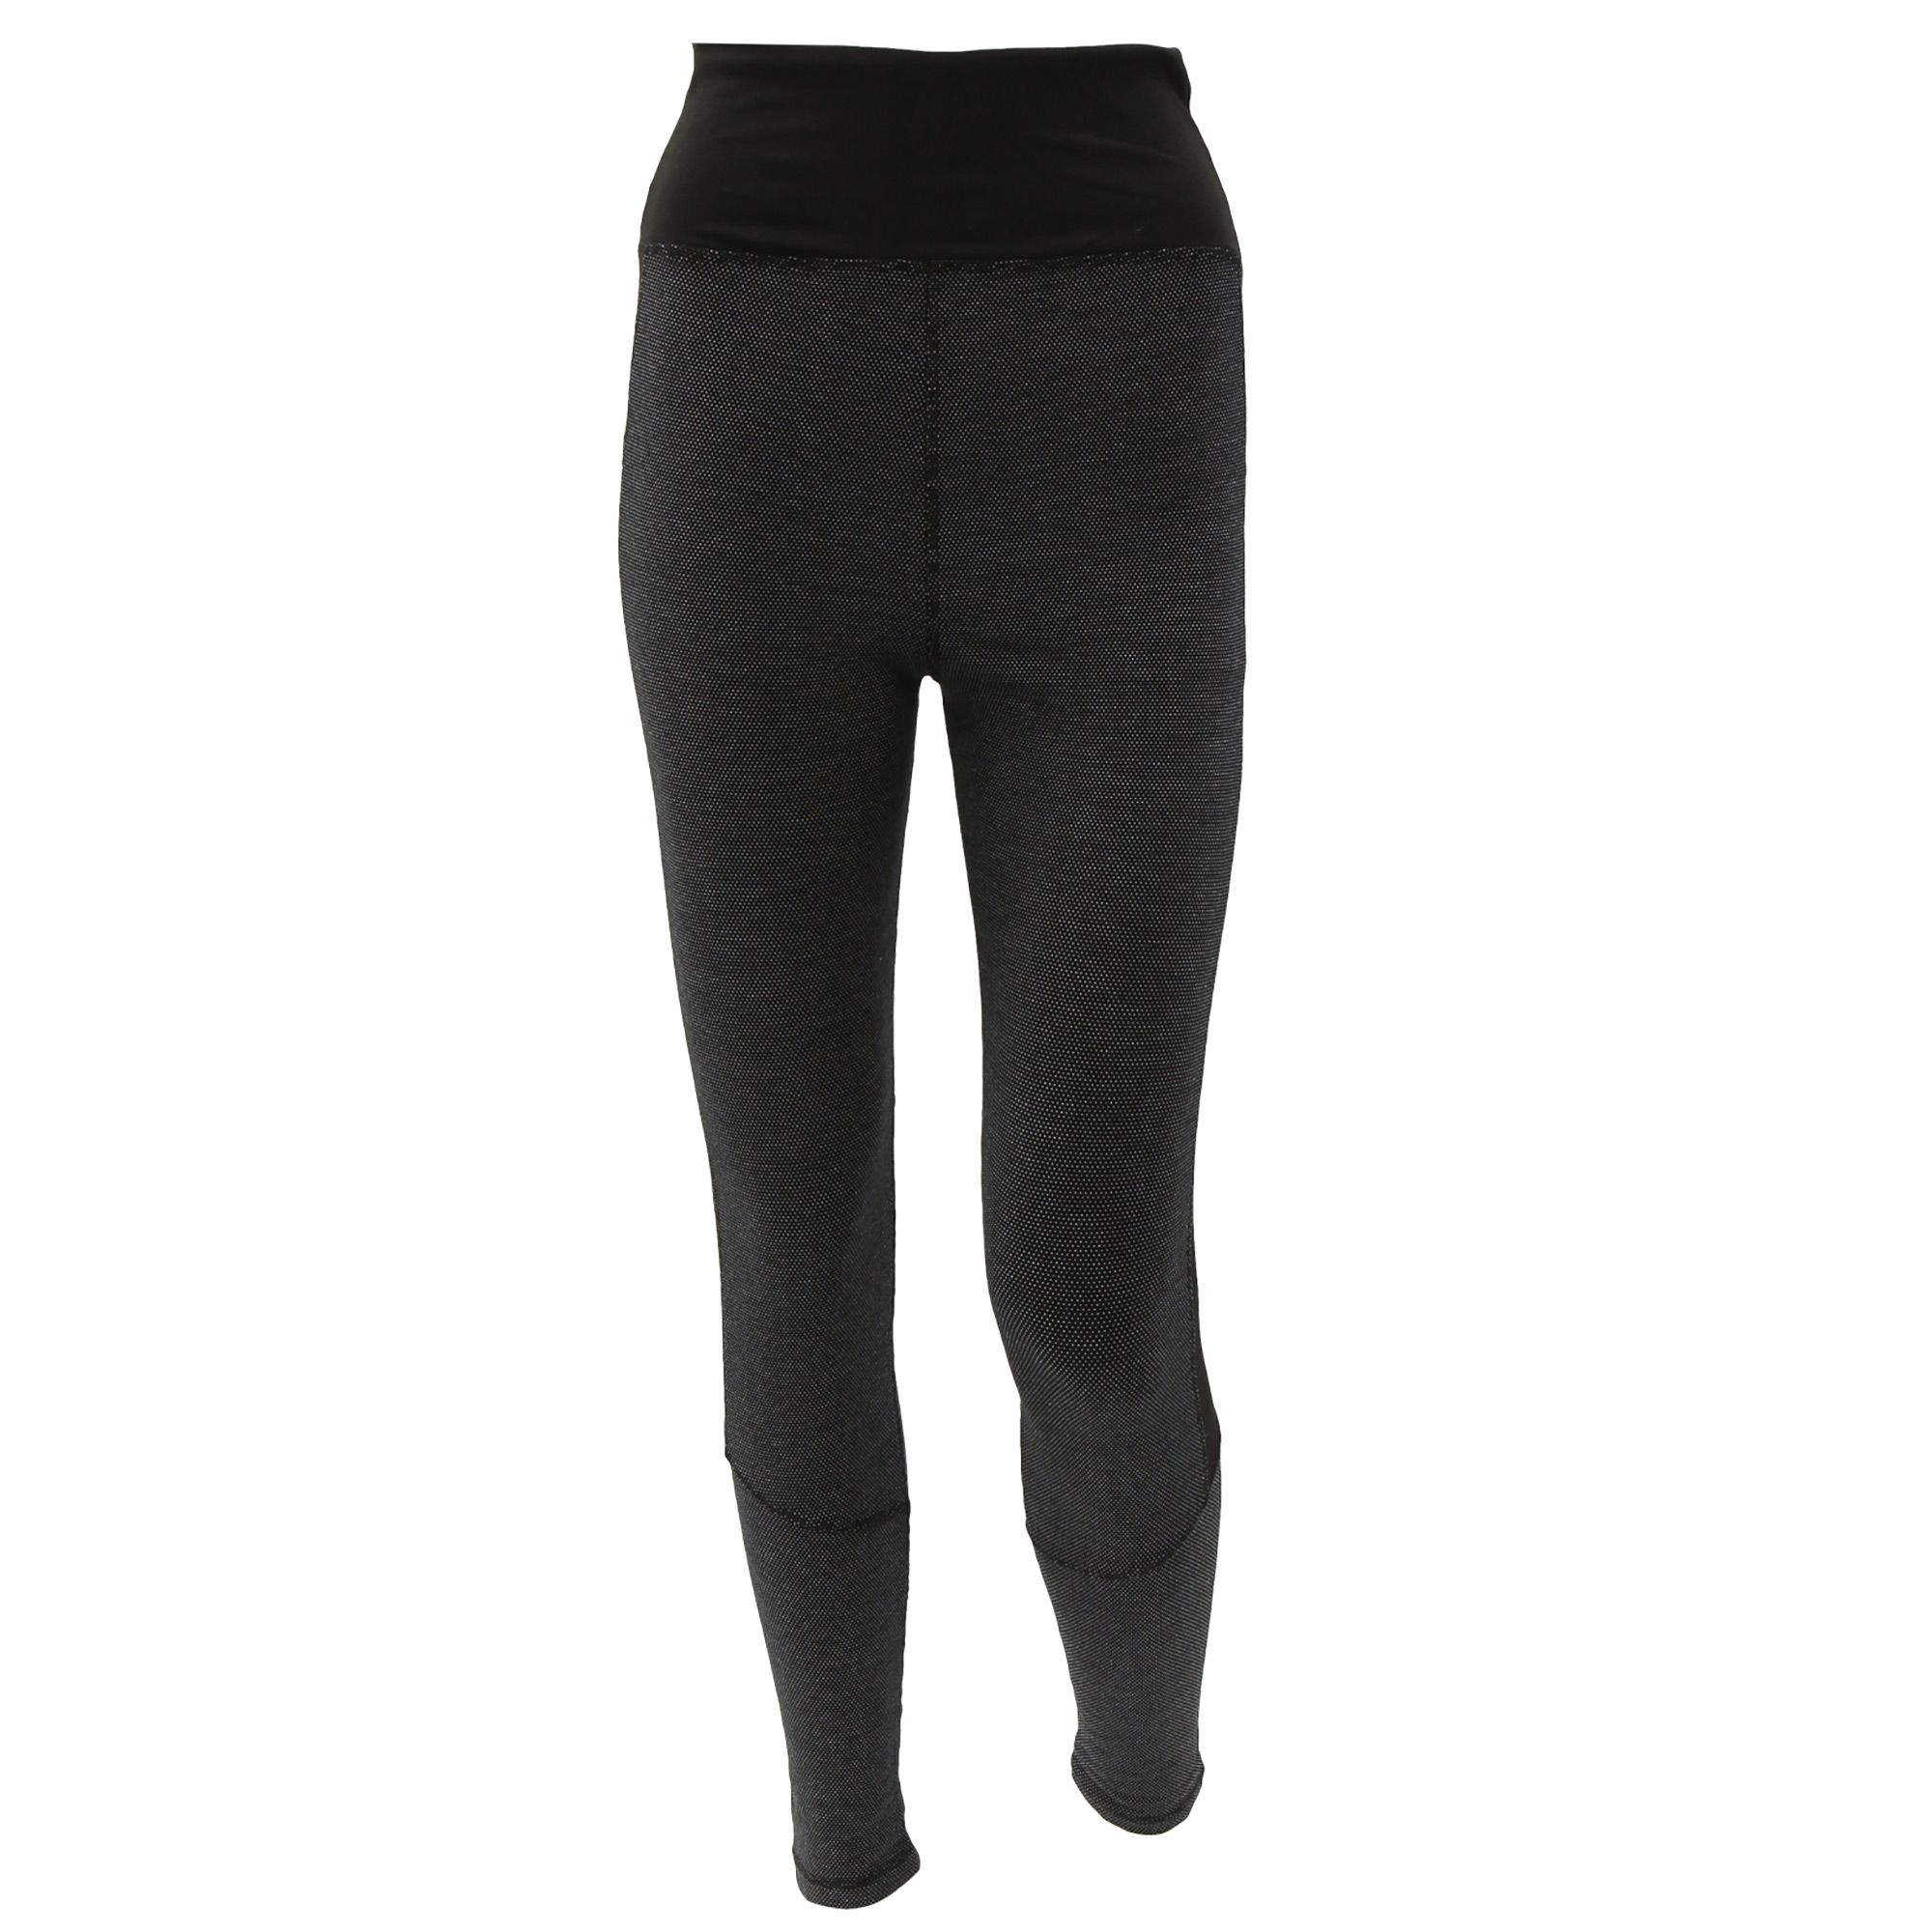 https://www.yogishop.com/out/pictures/master/product/1/prana_jacquard_high_waist_leggings_grey_front_web2000.jpg